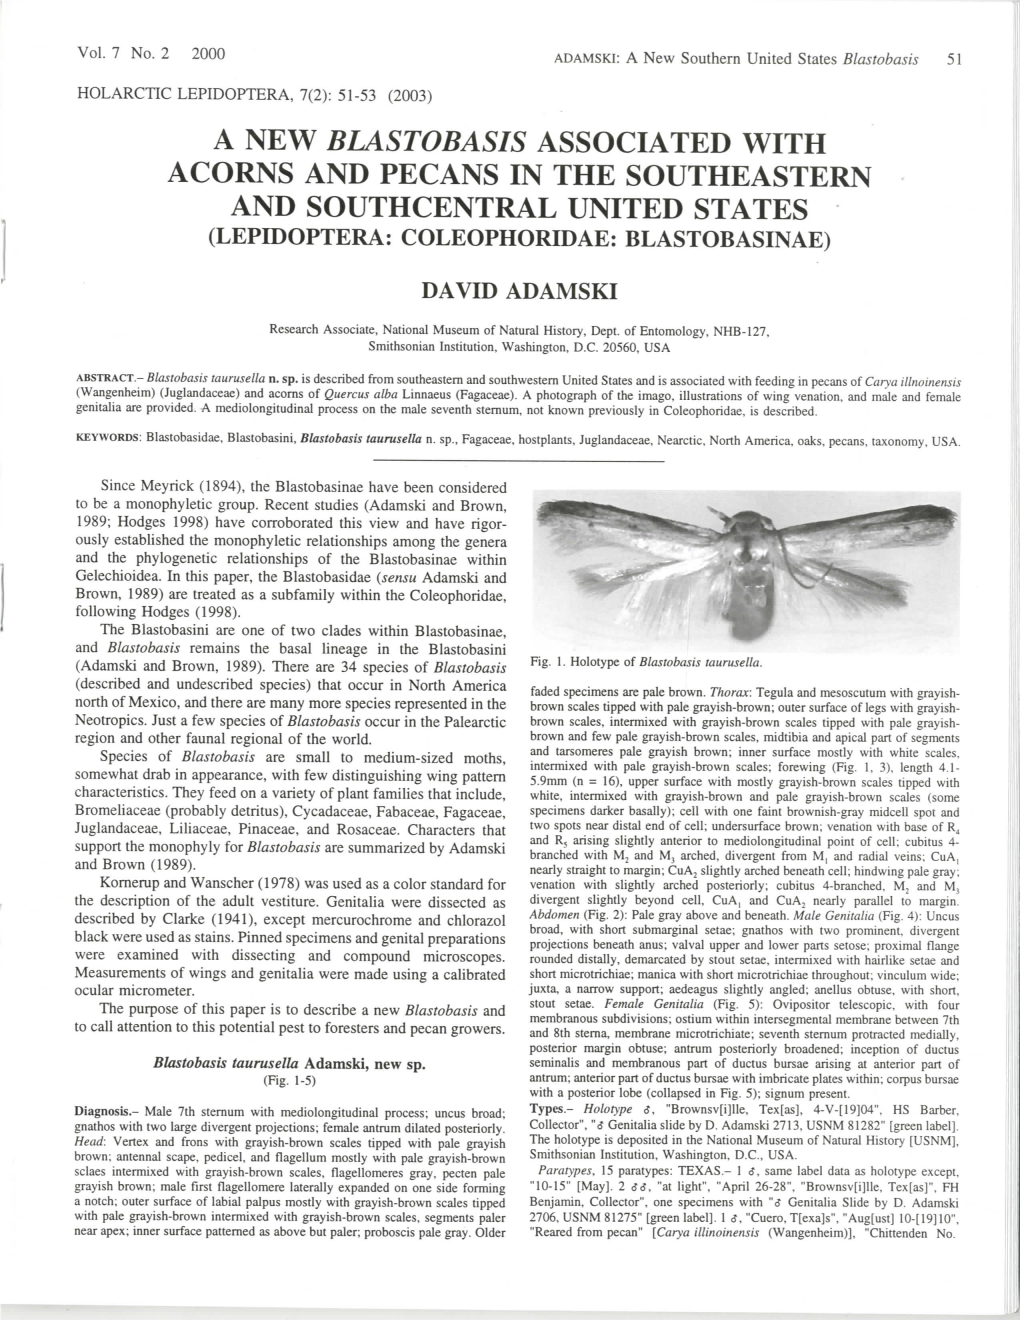 A New Blastobasis Associated with Acorns and Pecans in the Southeastern and Southcentral United States (Lepidoptera: Coleophoridae: Blastobasinae)